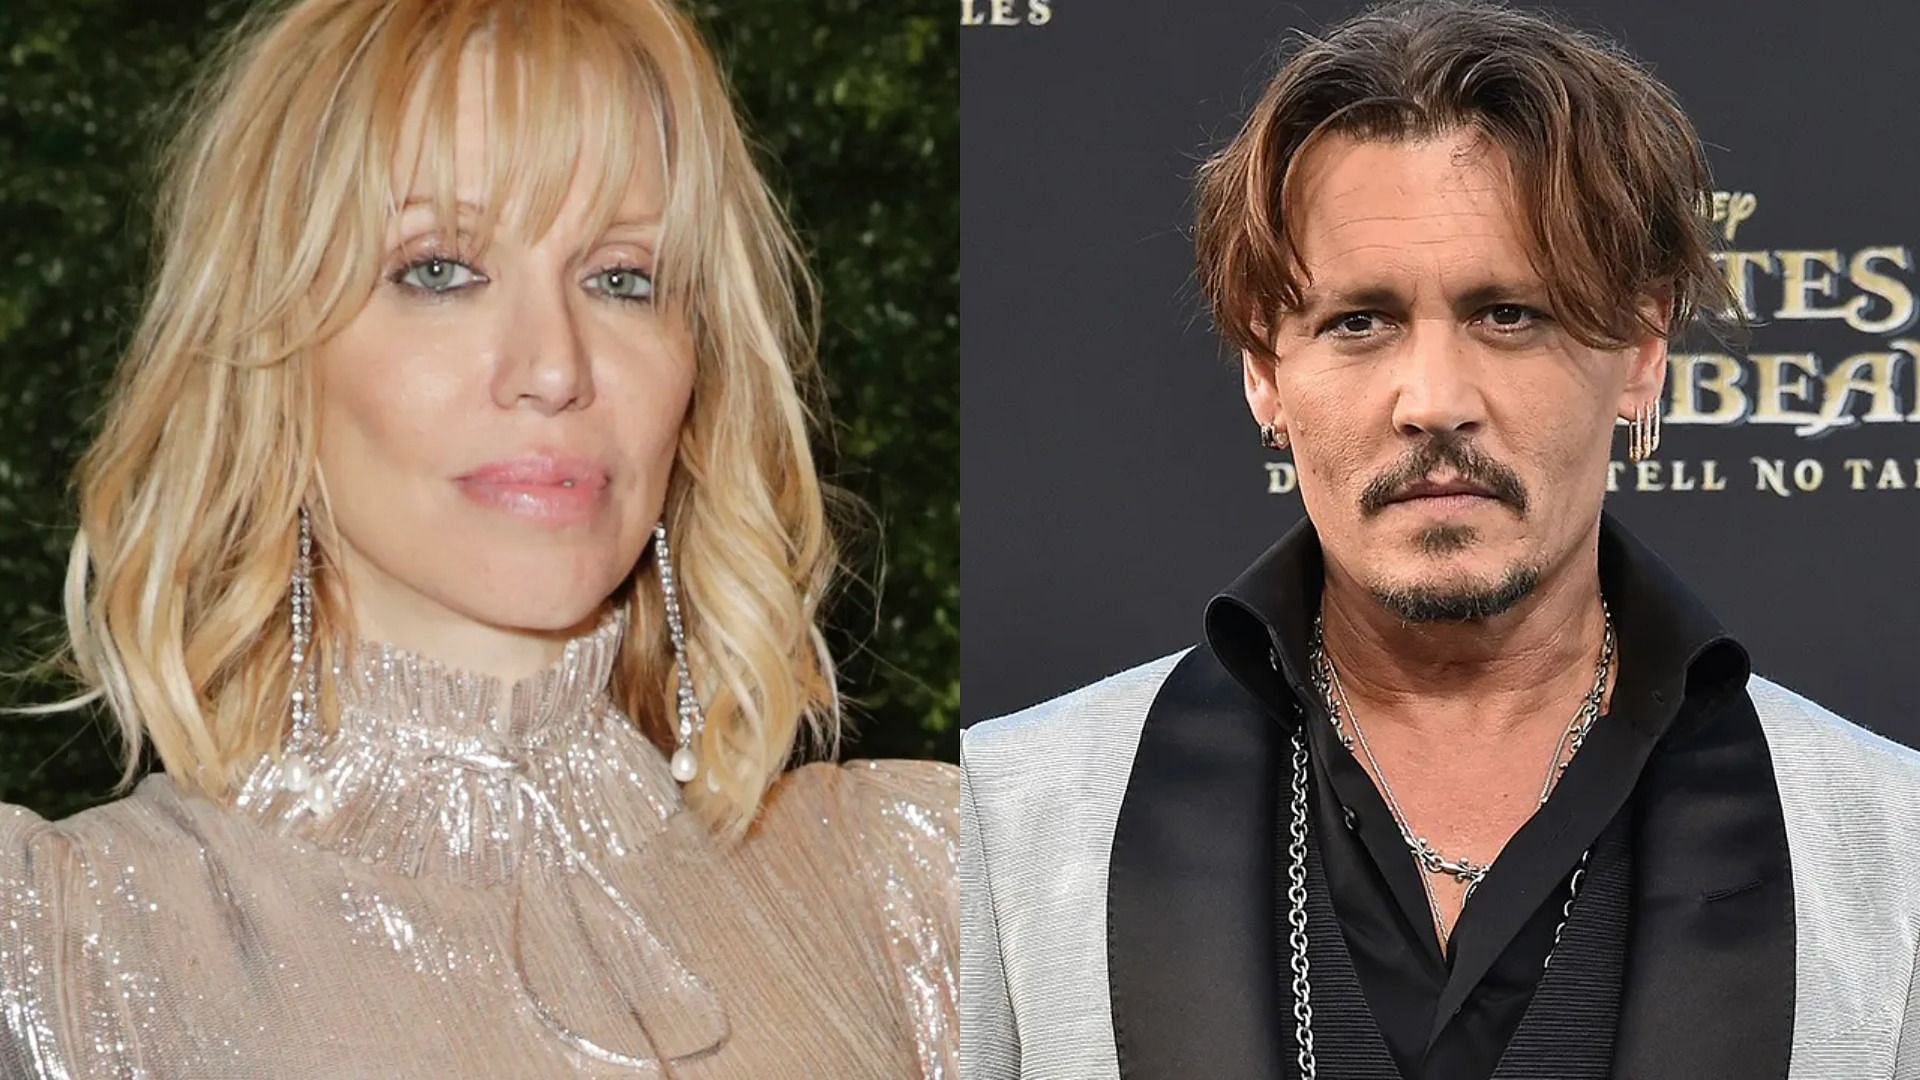 Courtney Love has revealed that Johnny Depp used to send a limo for her daughter to go to school when social workers were after her. (Image via Getty Images/David M. Benett/Axelle/Bauer-Griffin)